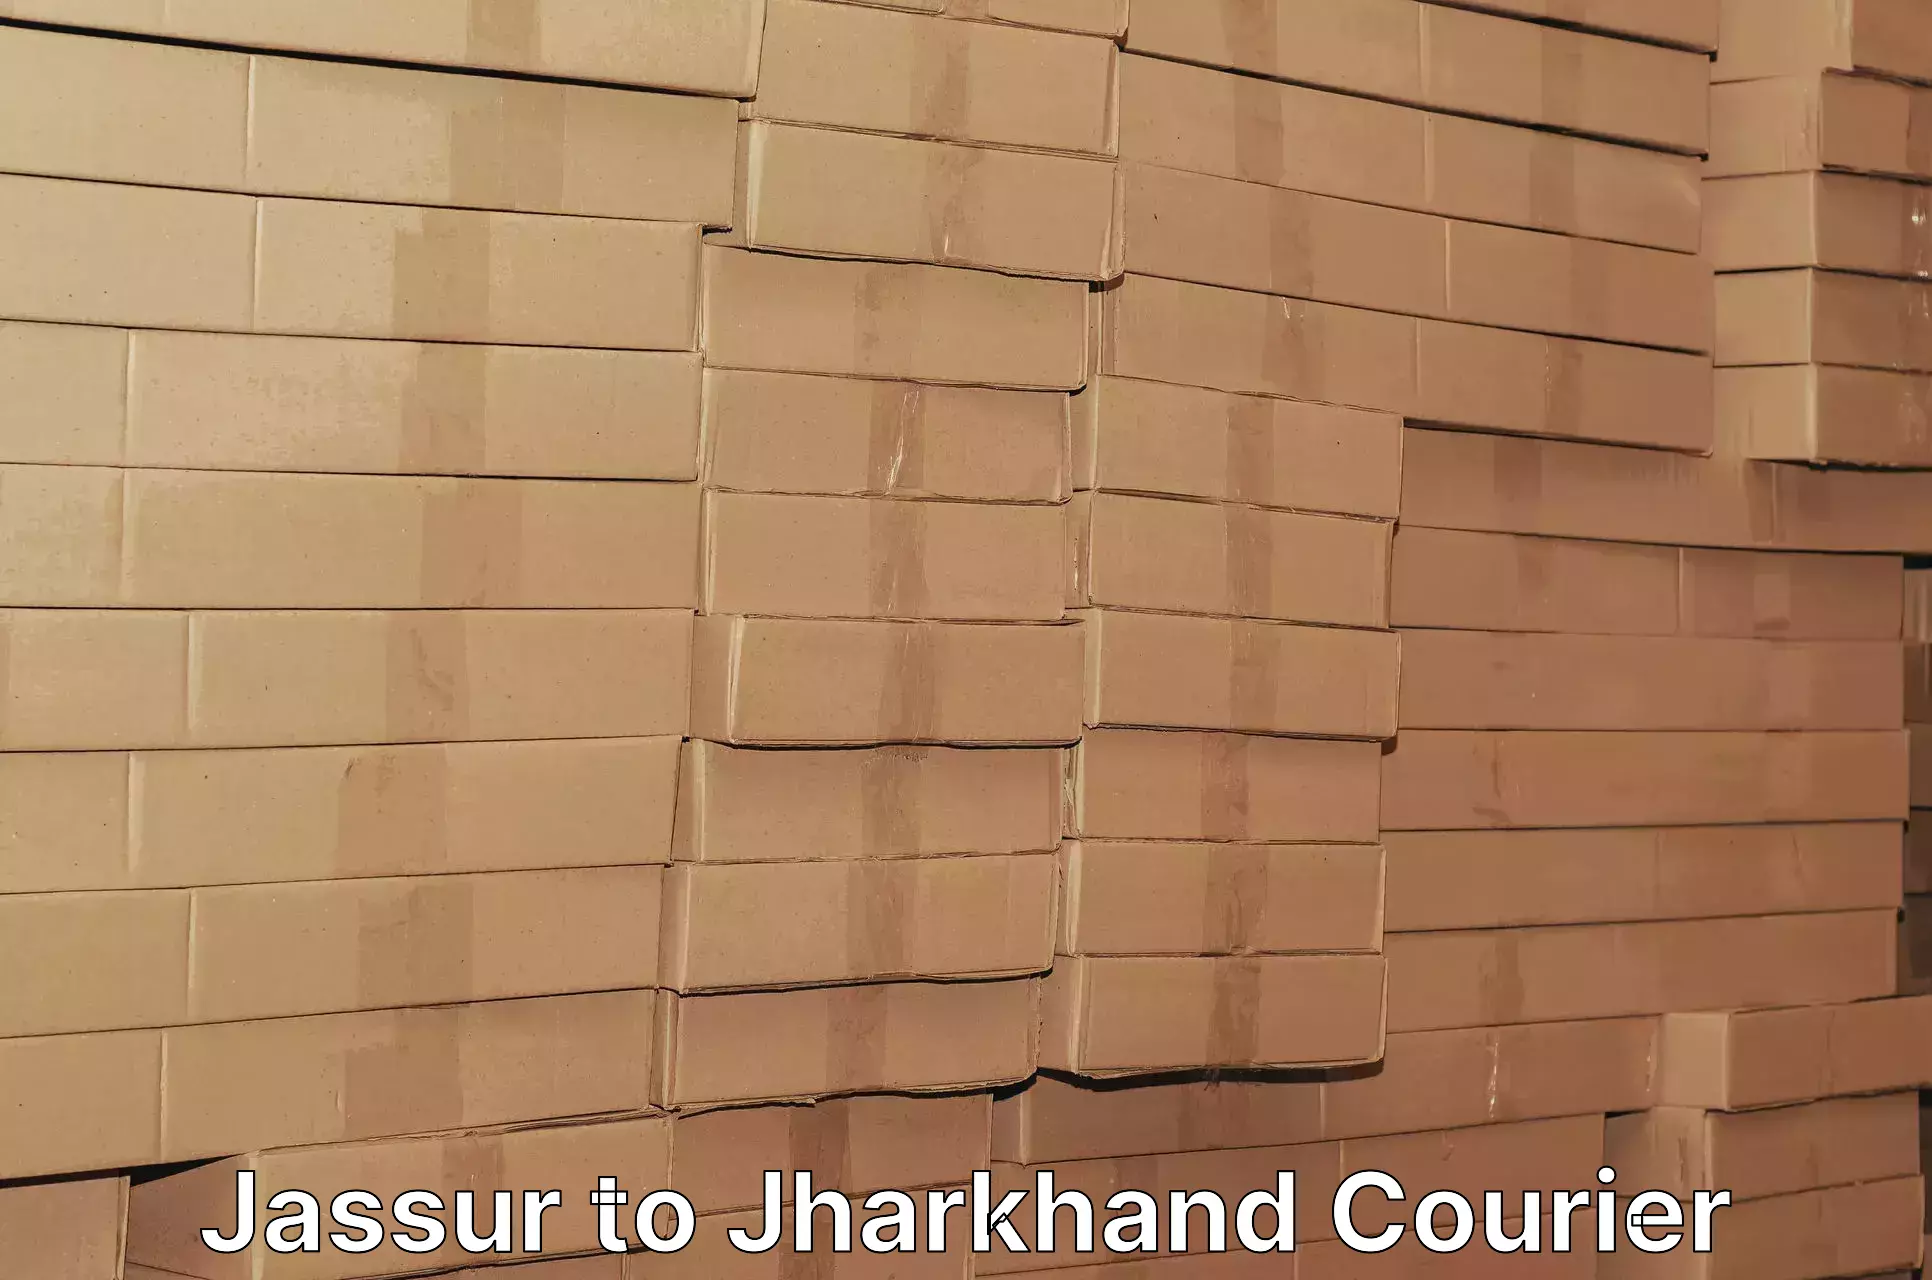 Smart shipping technology in Jassur to Dhanbad